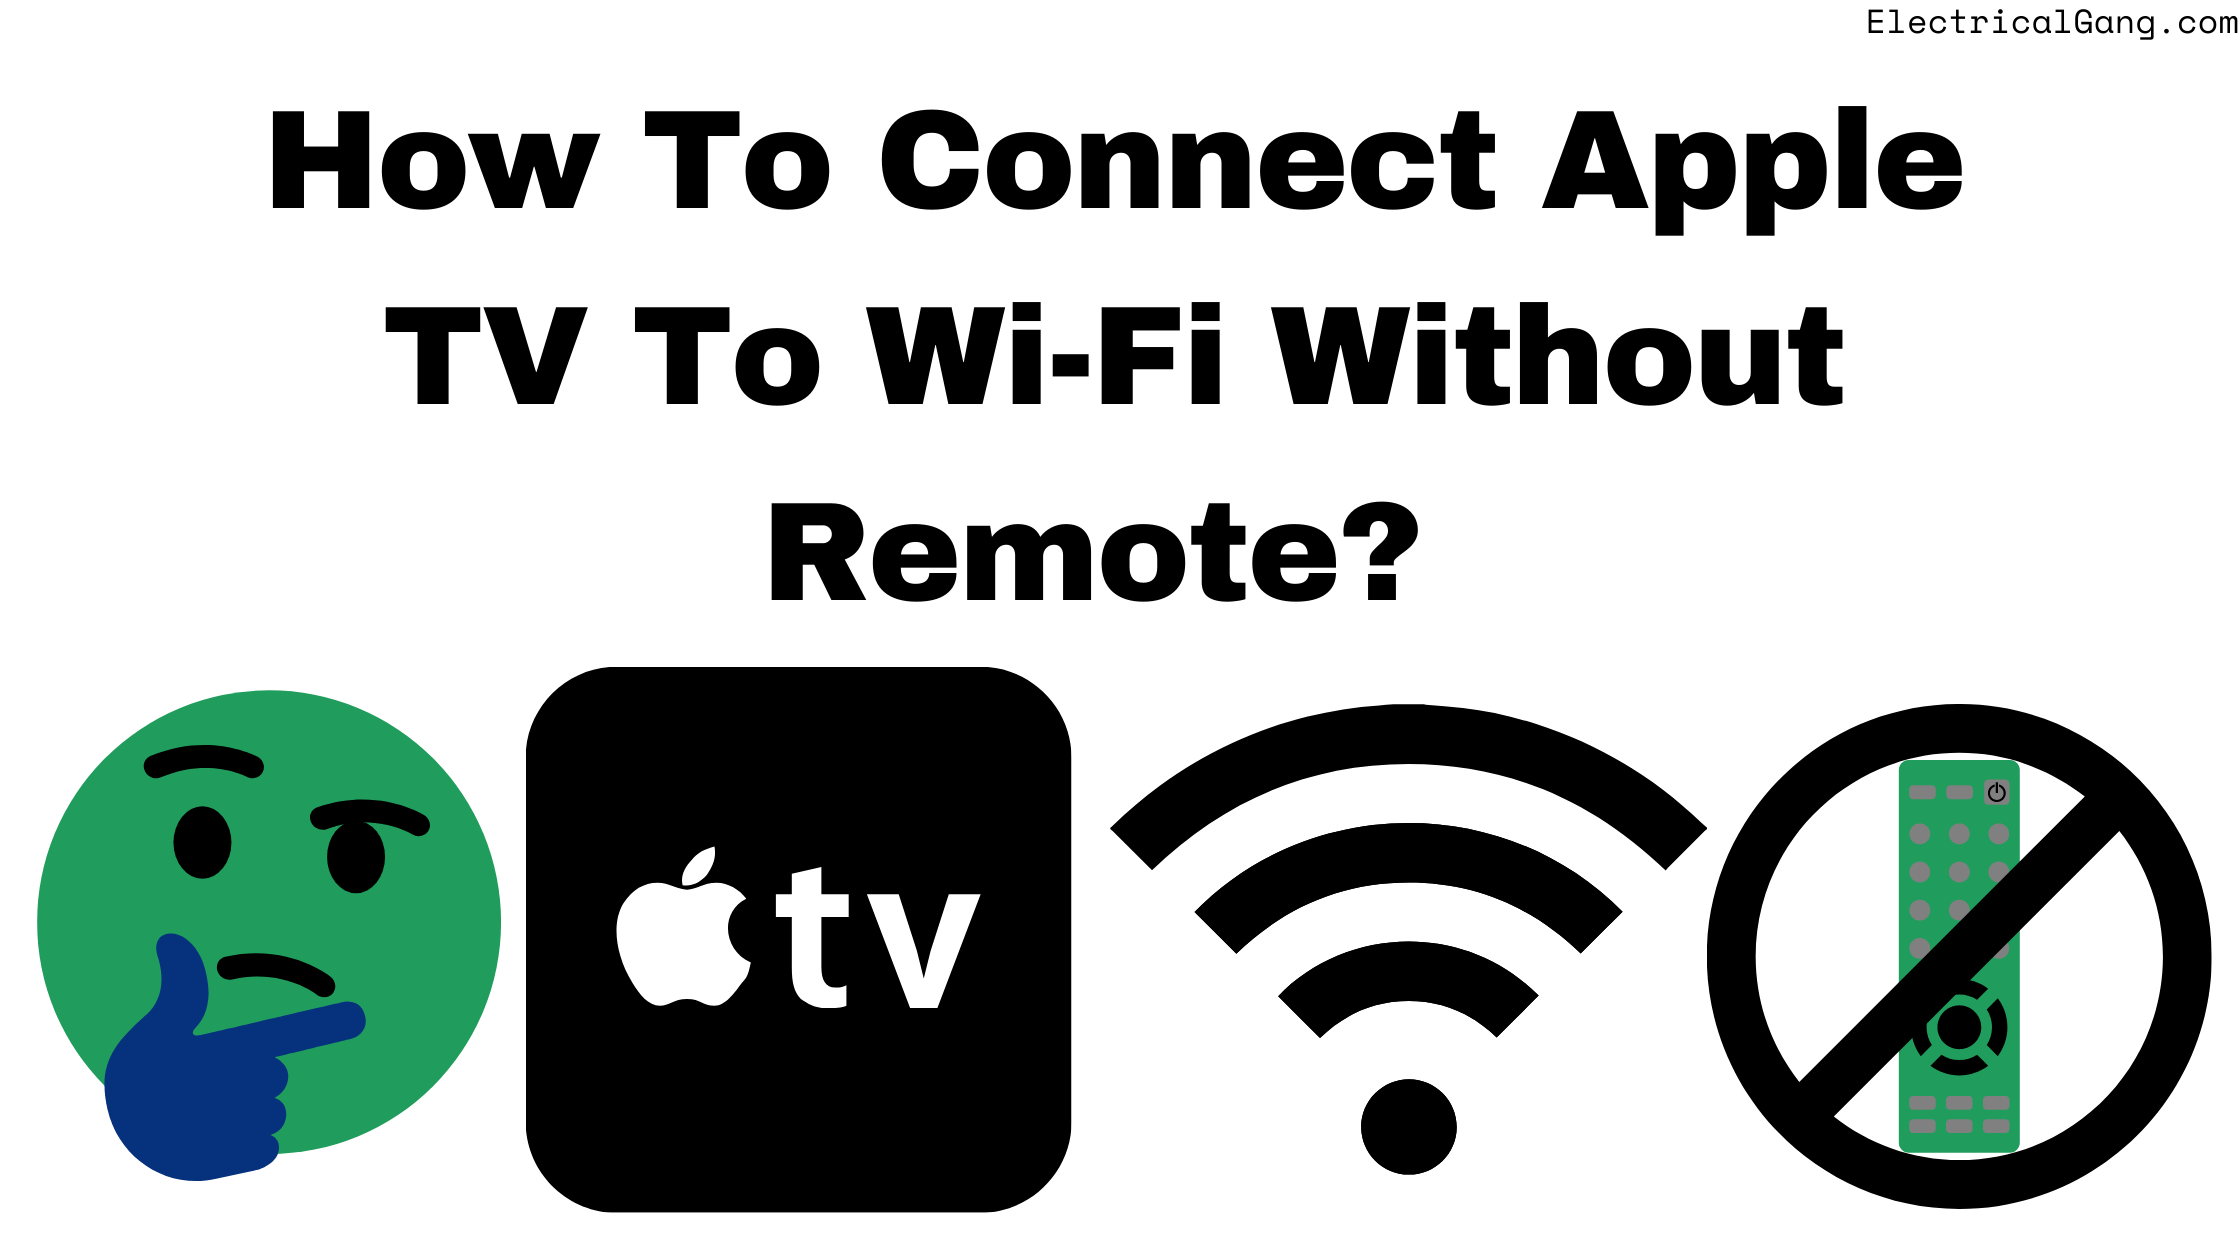 Without remote